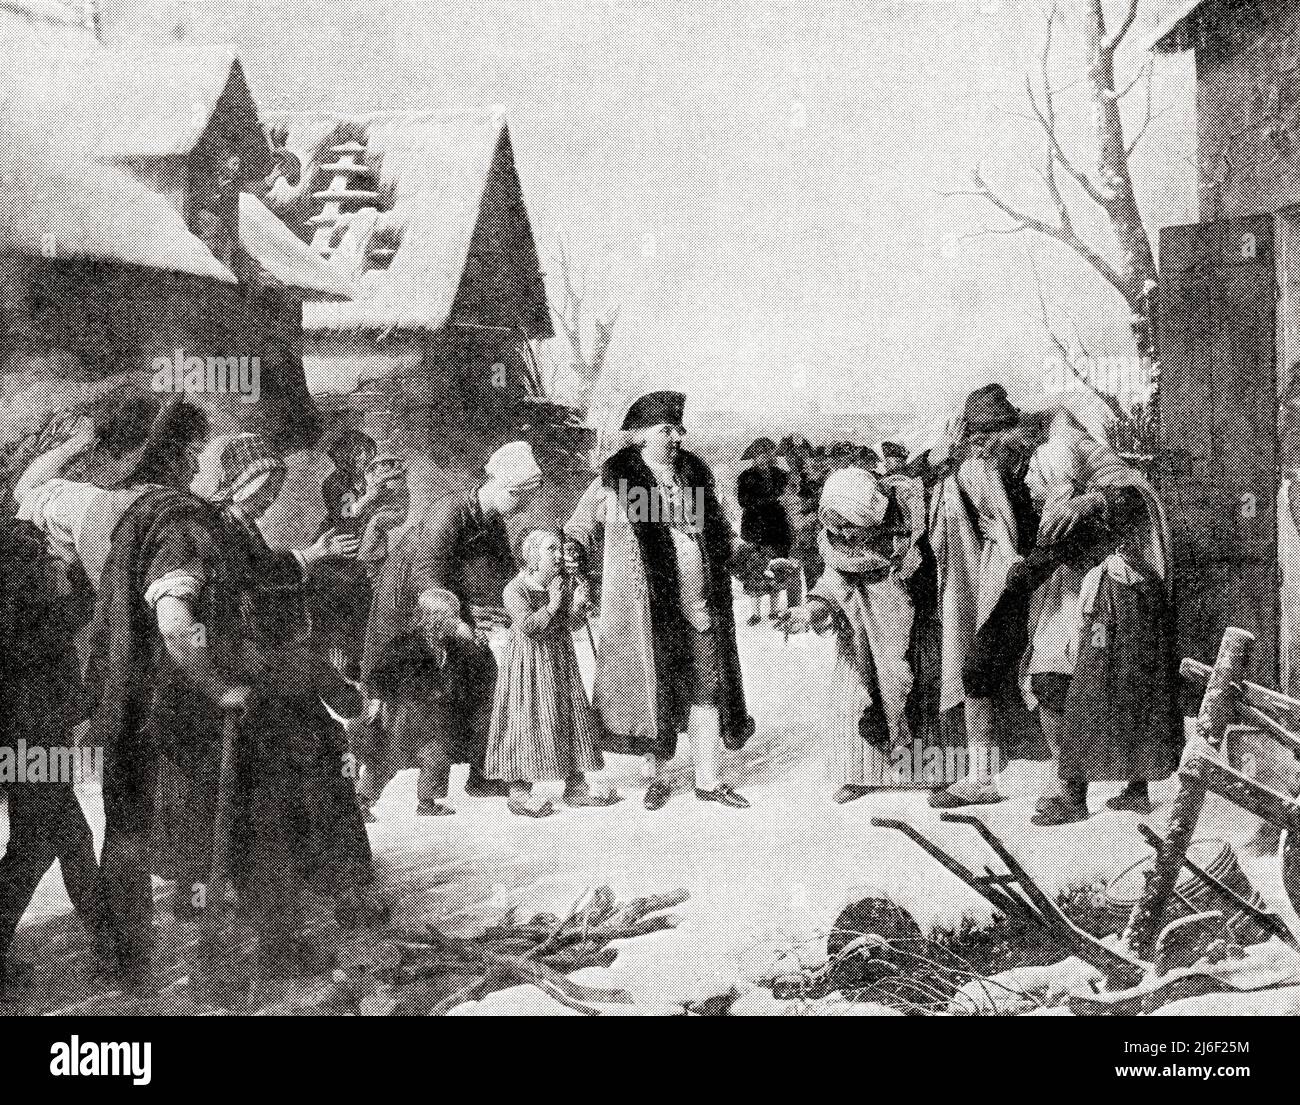 King Louis XVI distributing alms amongt the poor.  Louis XVI, 1754 – 1793. Last King of France before the French Revolution. From The Wonderland of Knowledge, published c.1930 Stock Photo